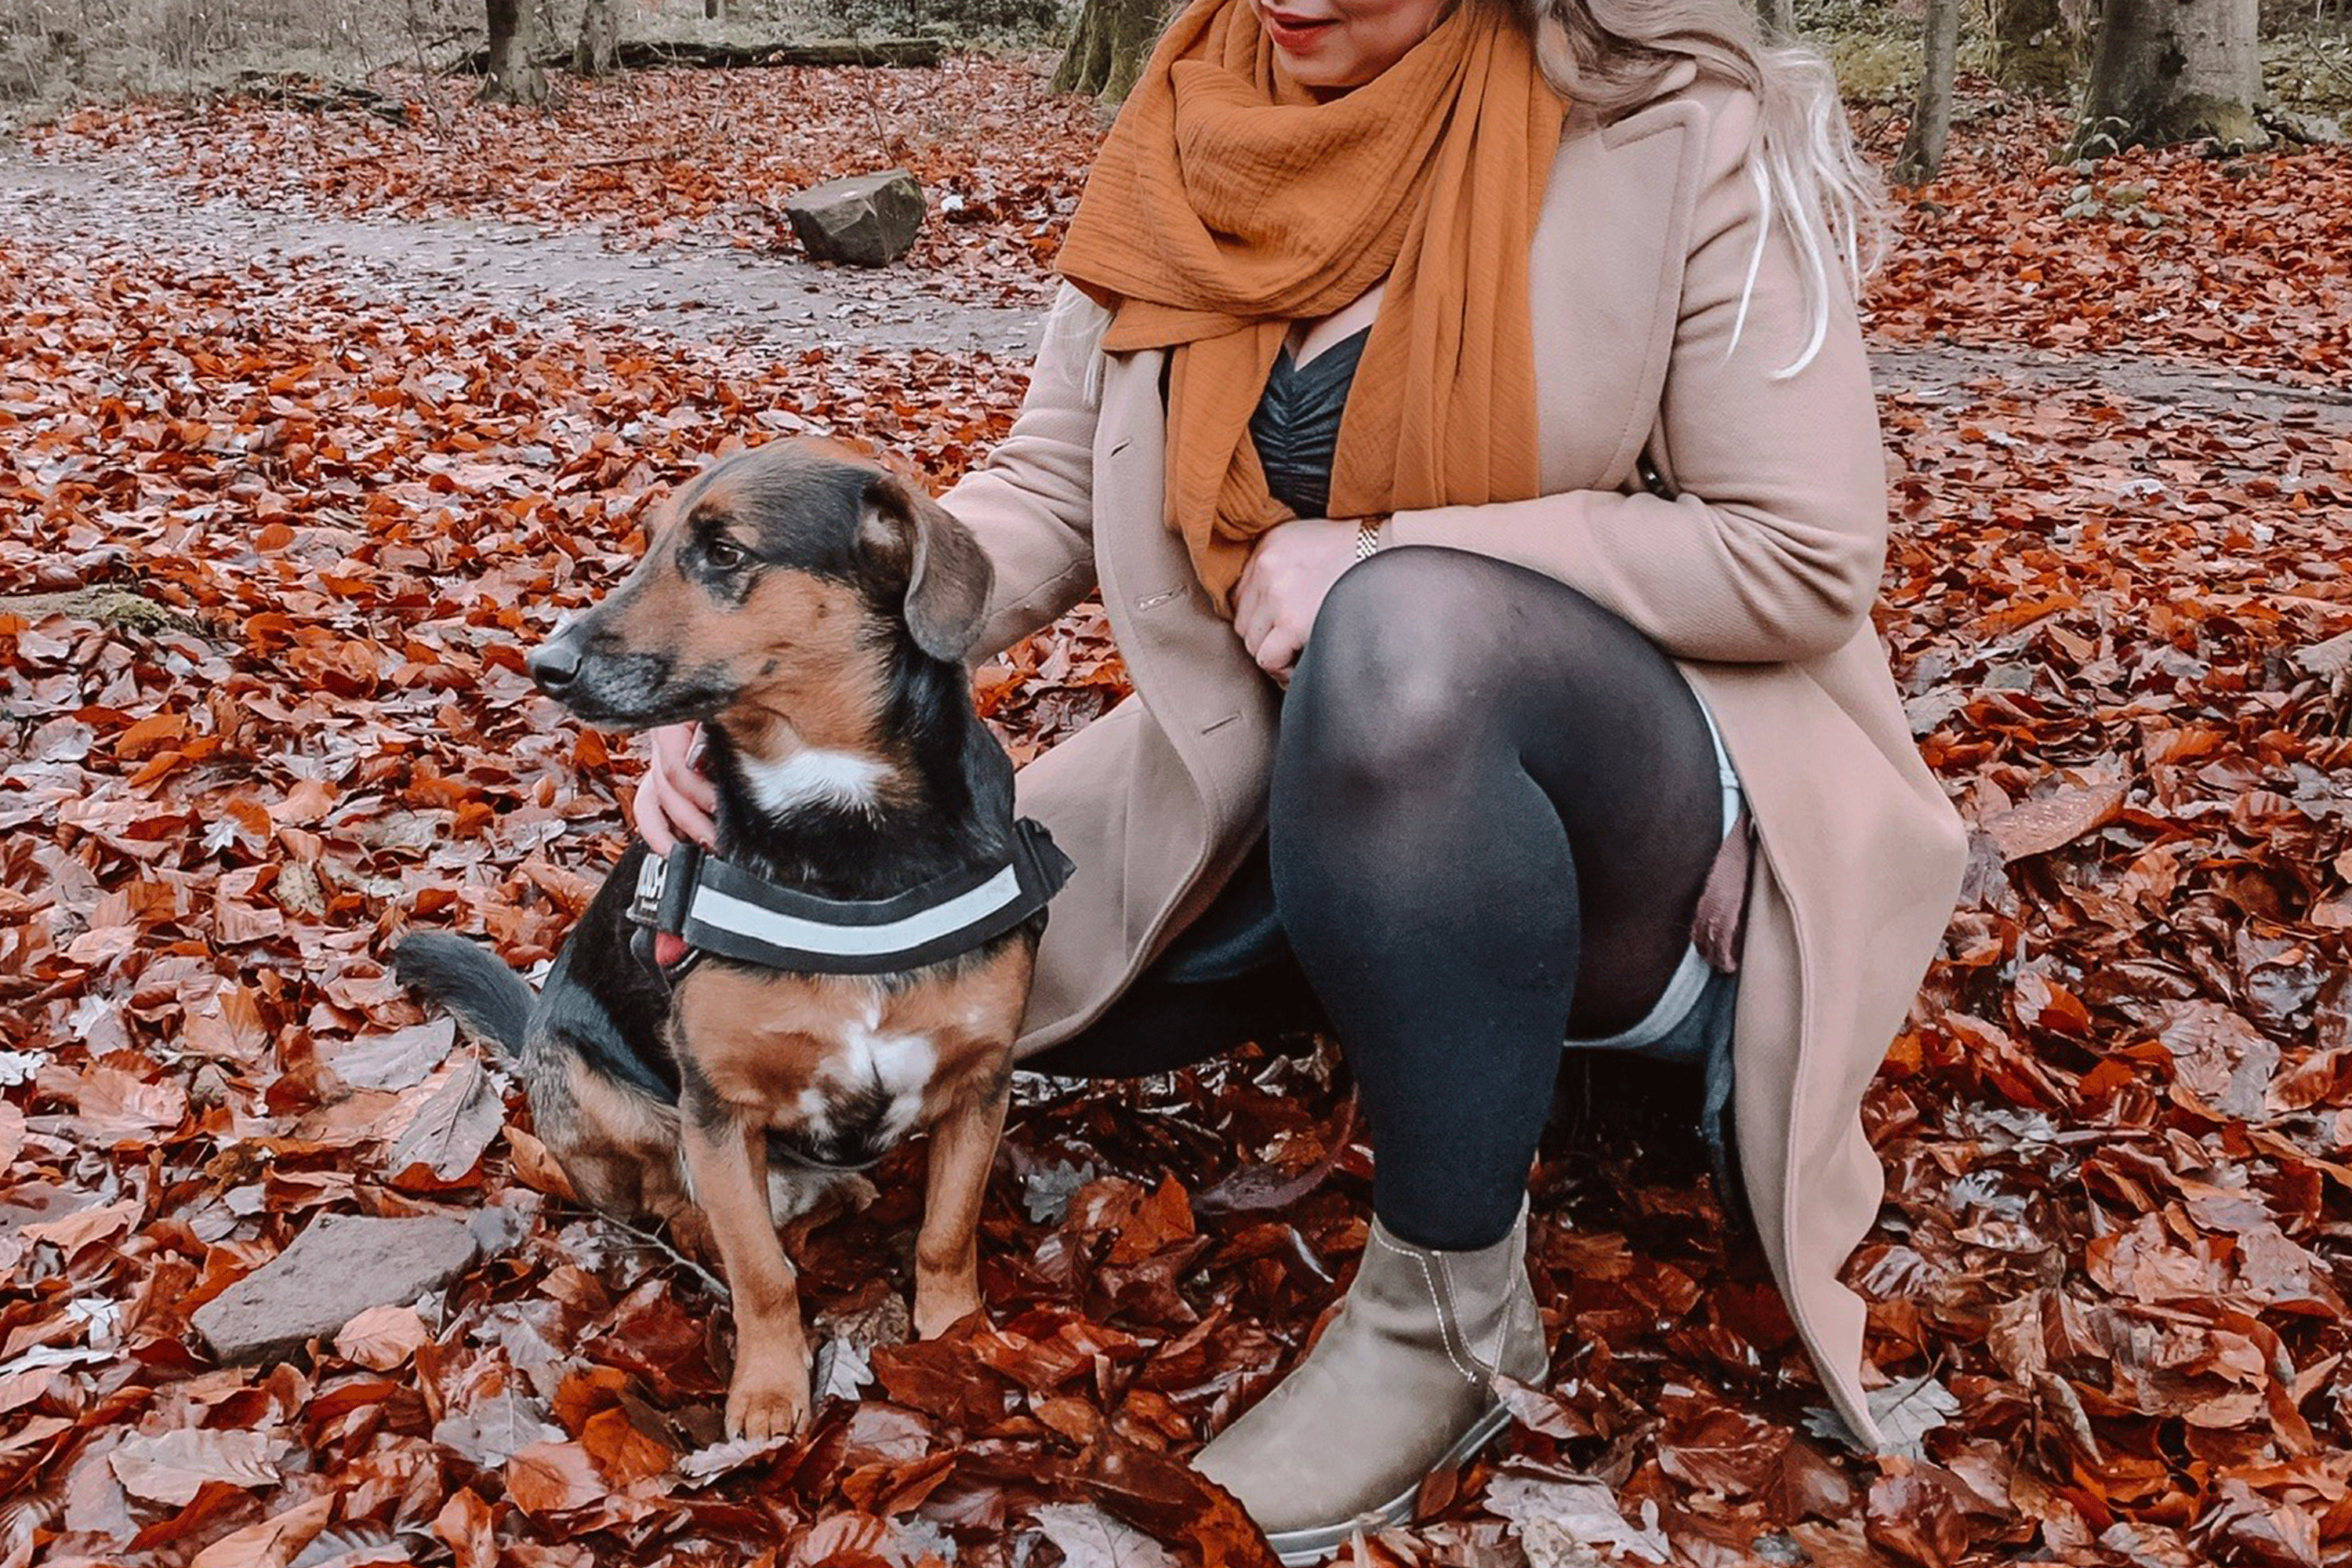 Woman crouched down on Autumn leaves holding her dog.